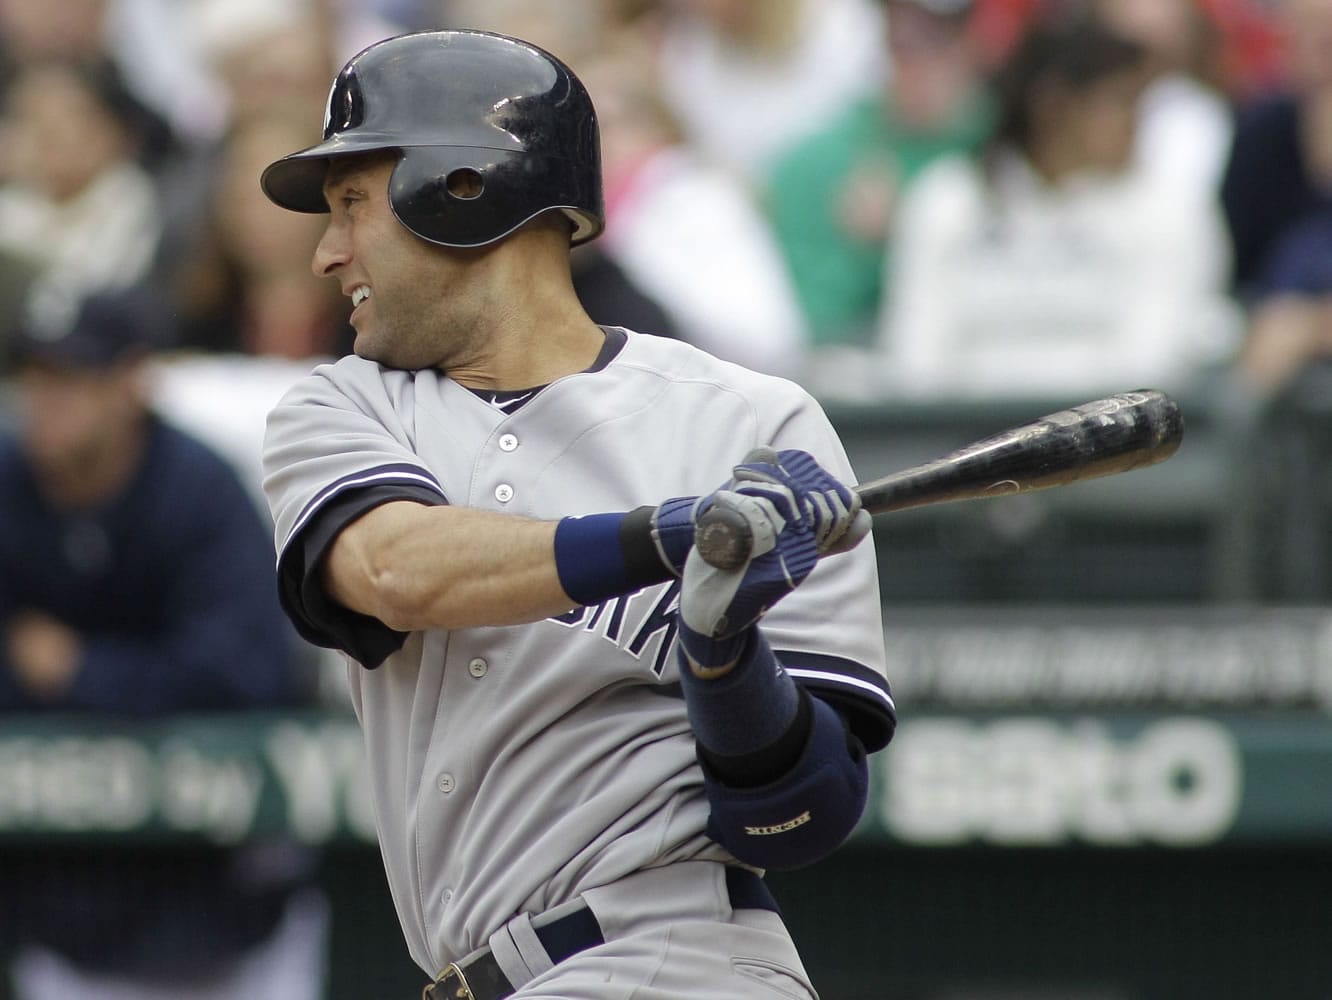 The New York Yankees' Derek Jeter entered Friday's game needing 16 hits to reach 3,000 for his career.